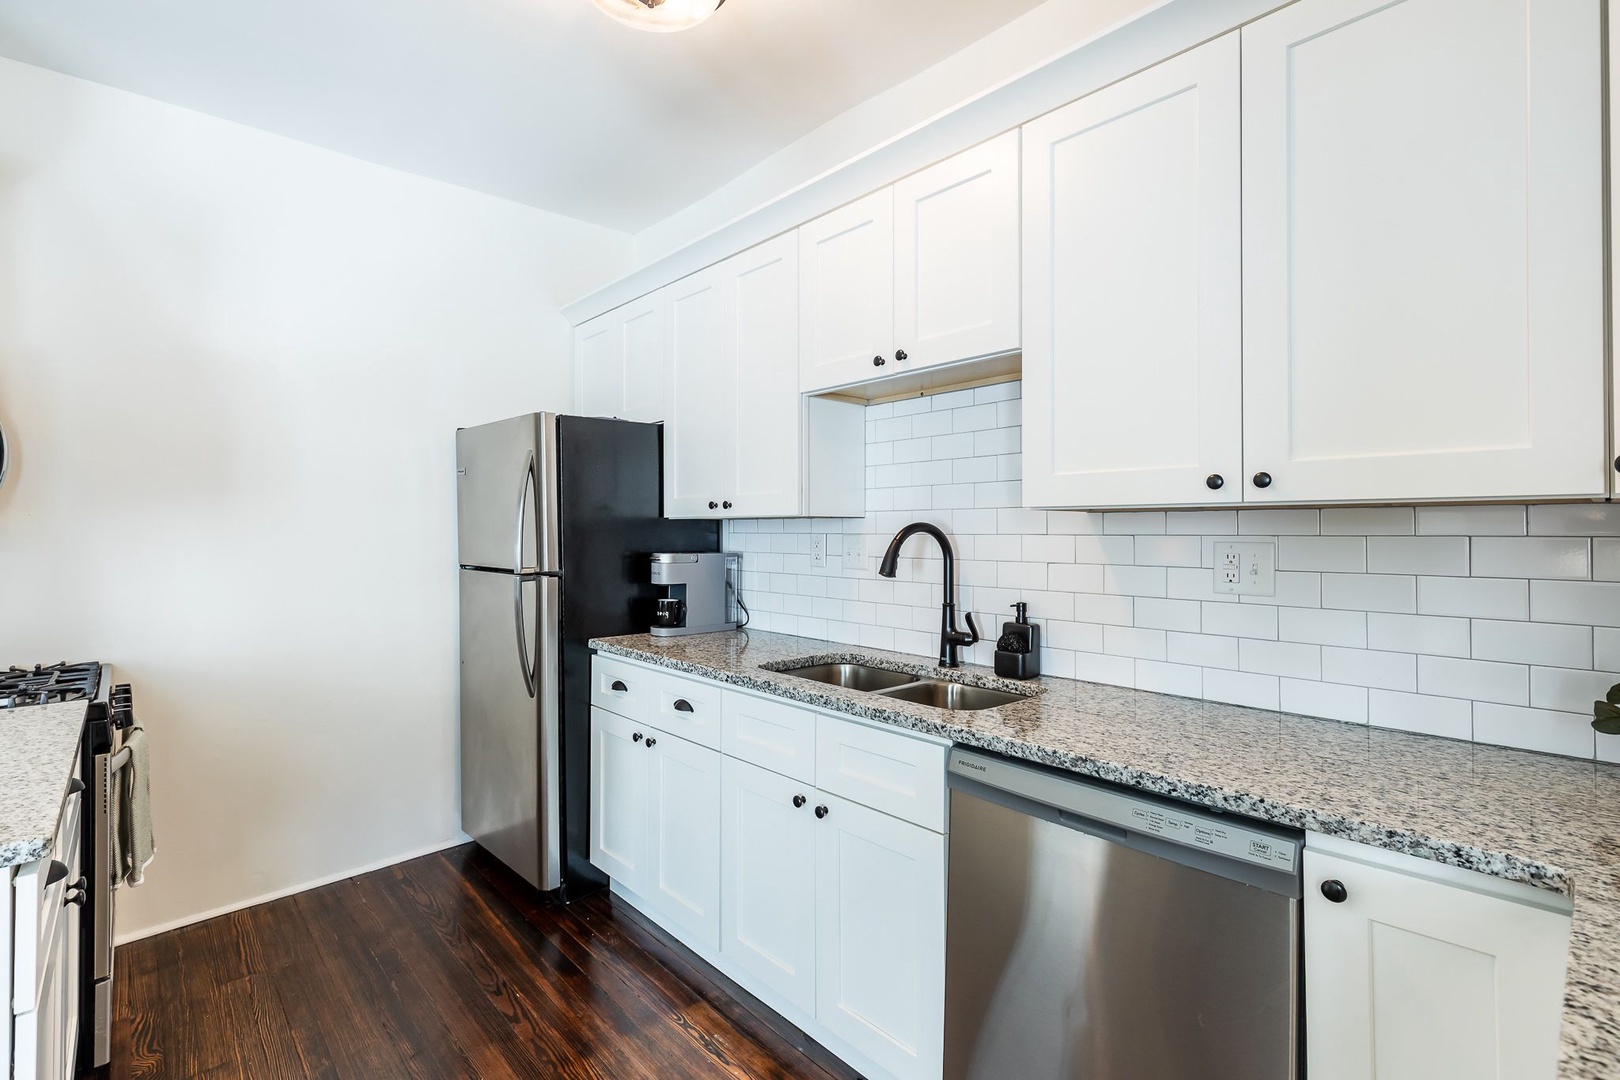 Apt 1 – The kitchen is spacious & well-equipped for your visit